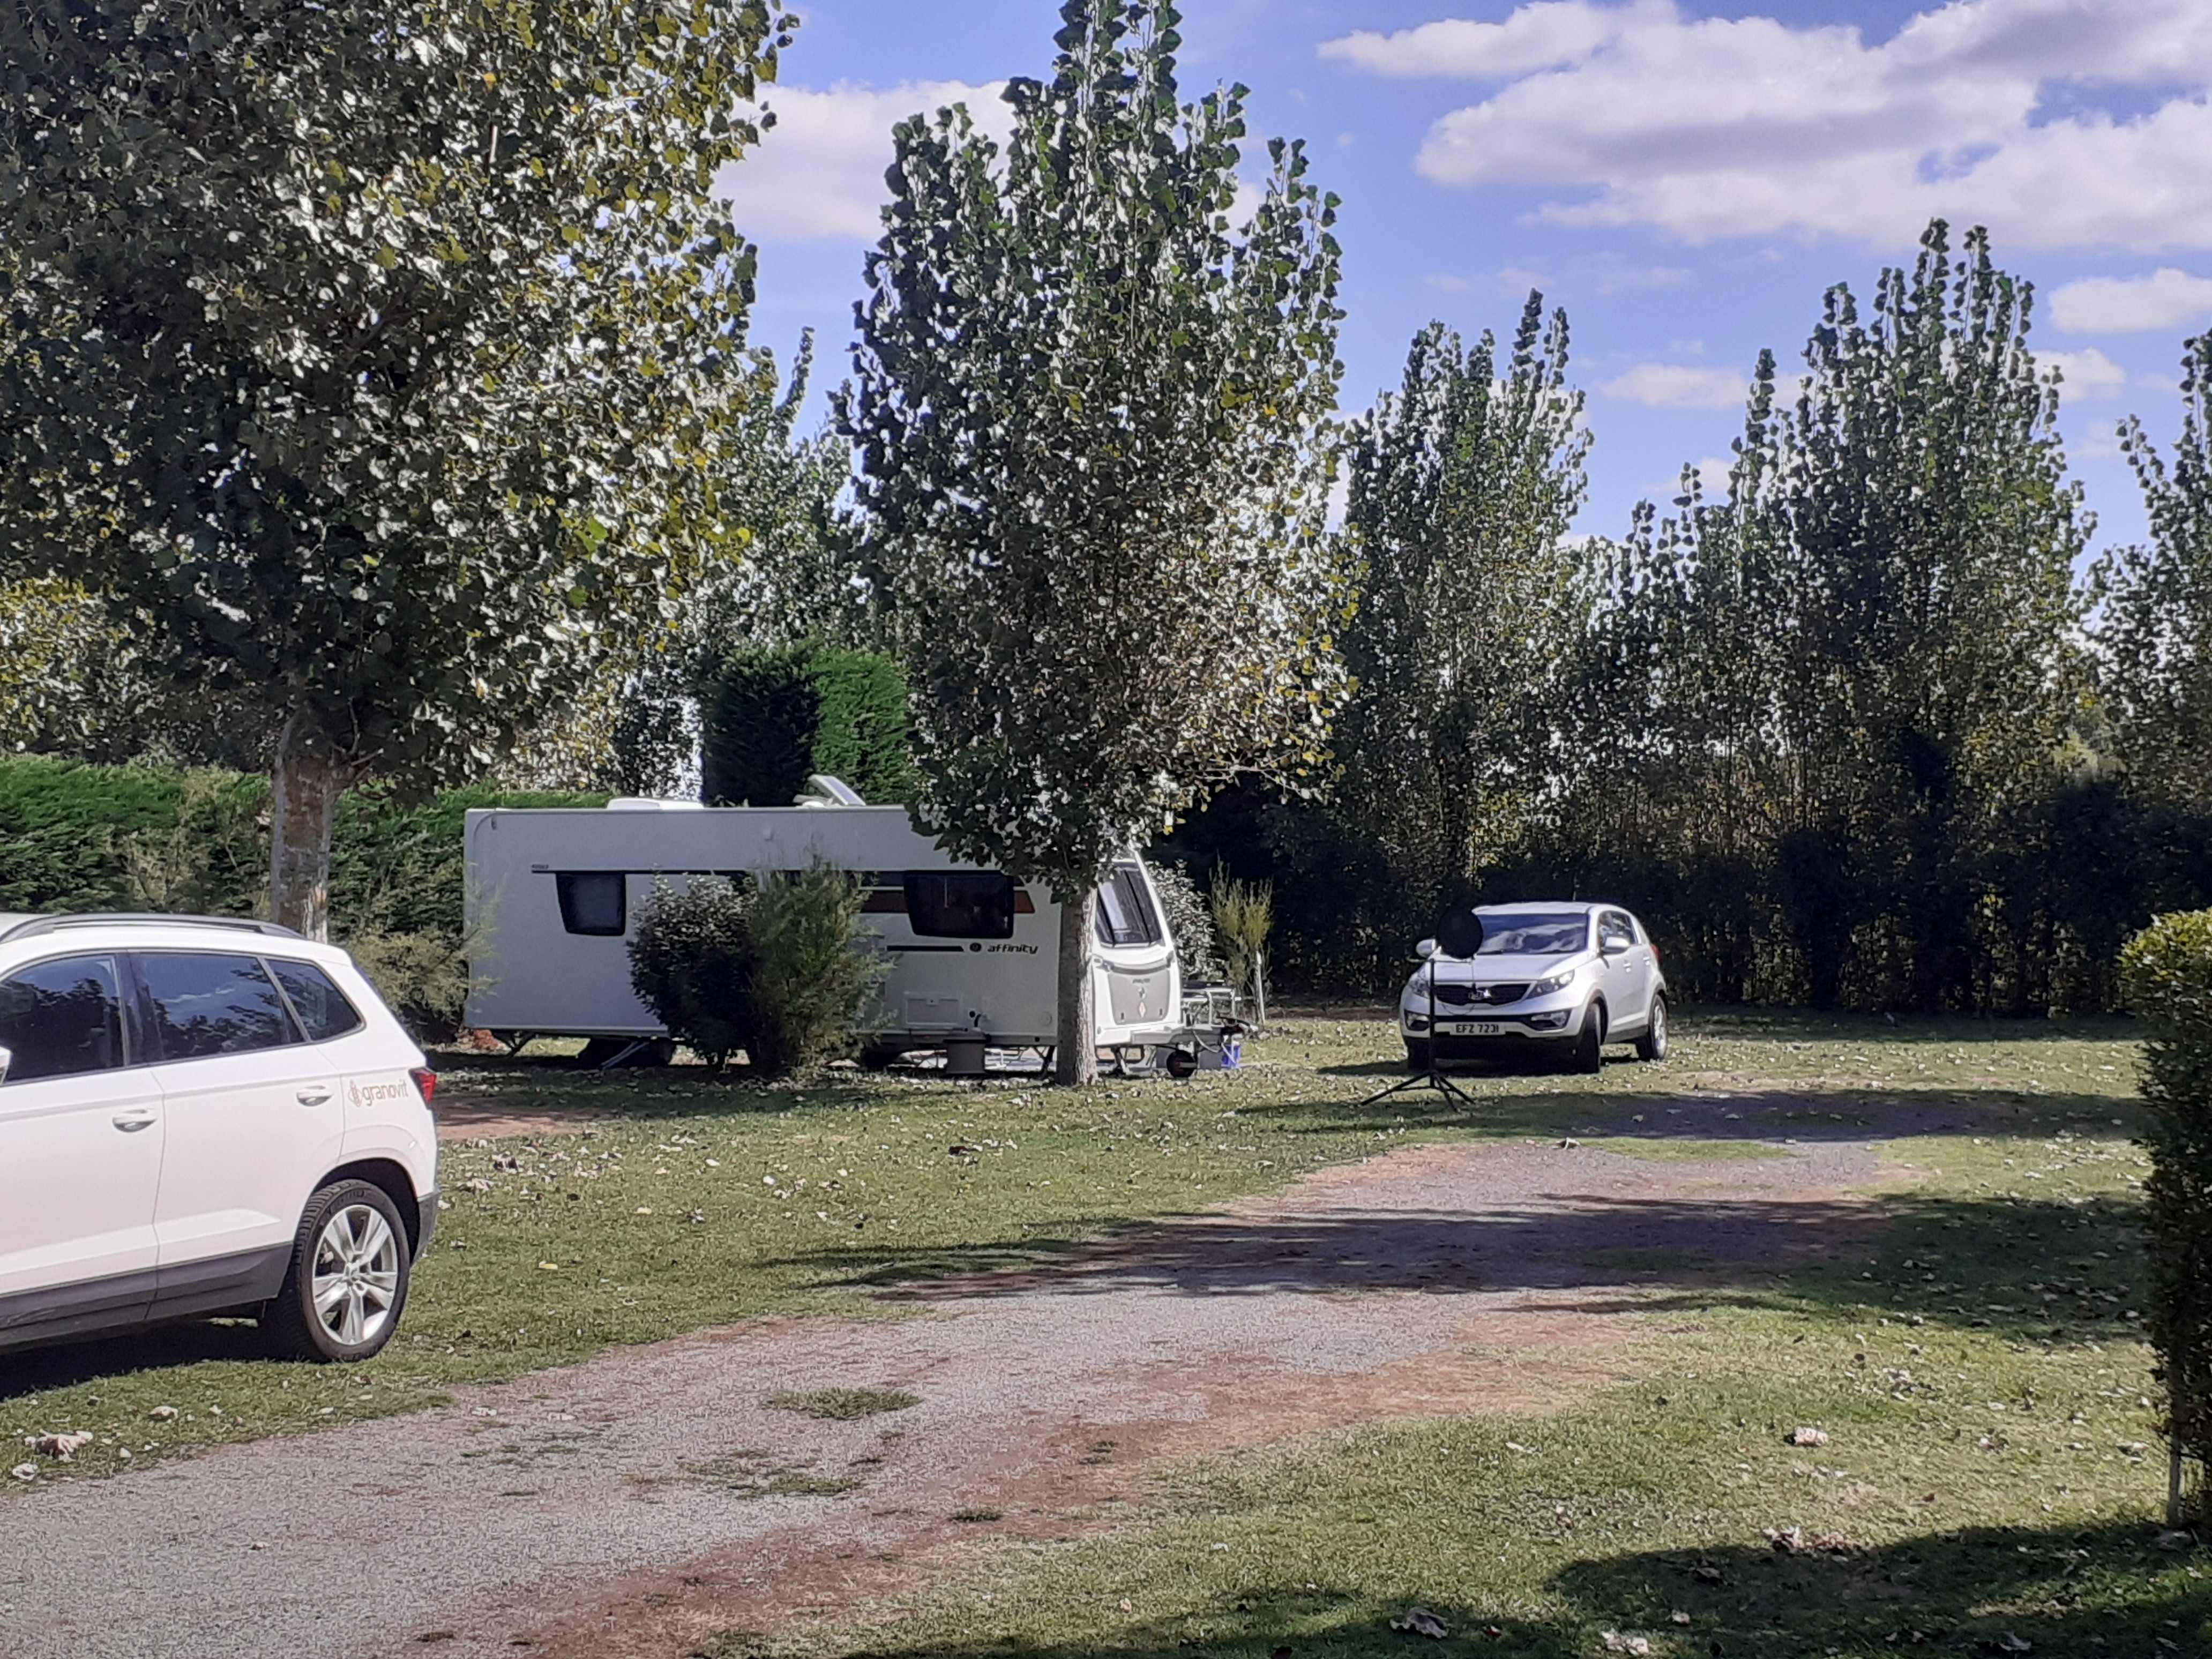 Pitch caravan – 7.50 m  (water, electricity, drain, 2 people and 1 vehicle) 1/2 Ppl. 1/2 pers.